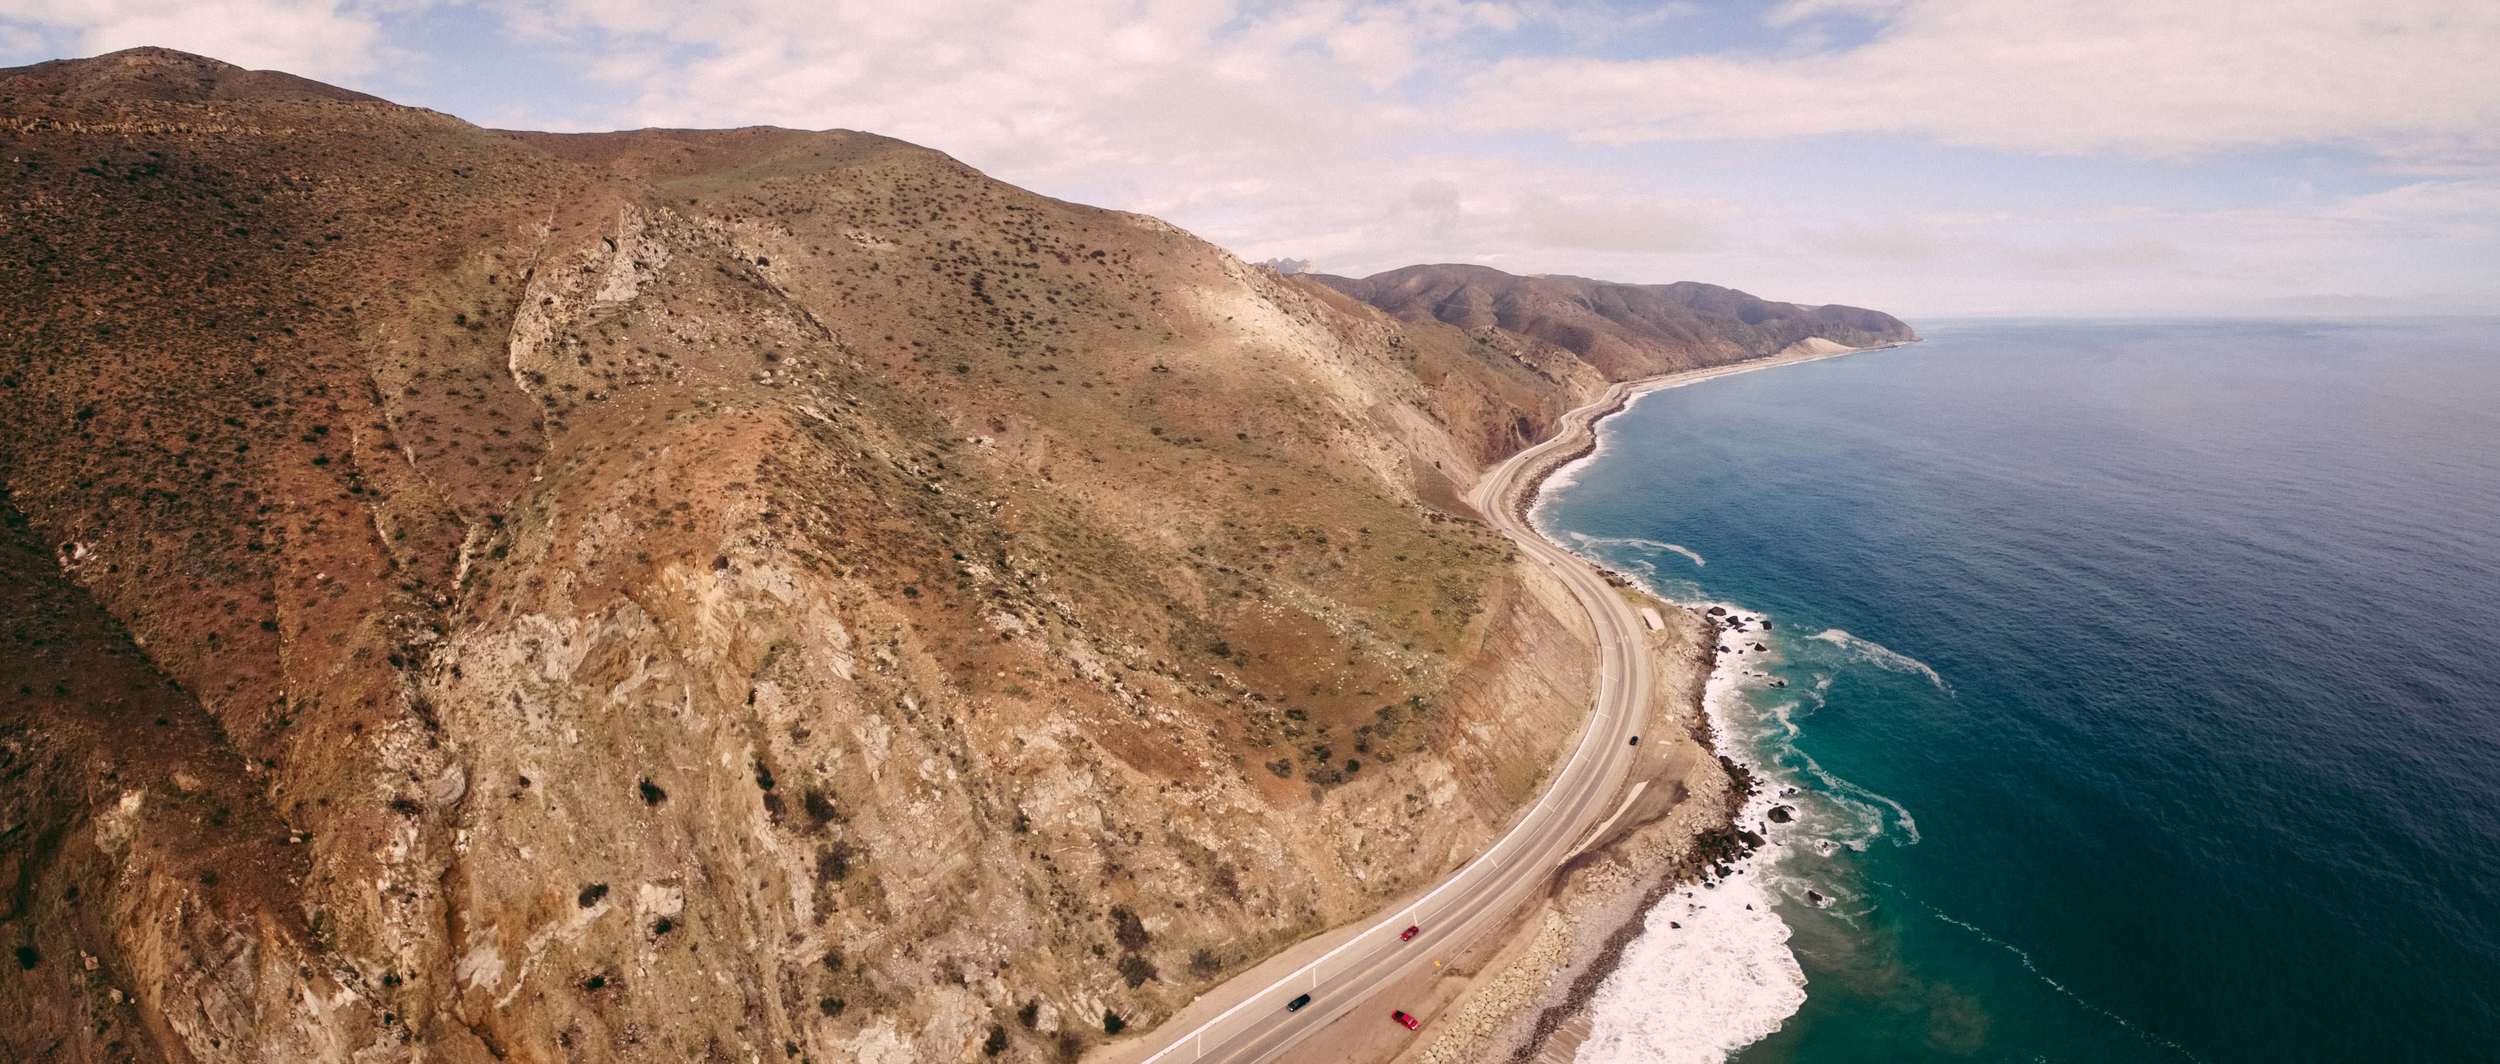 The majestic Pacific Coast Highway